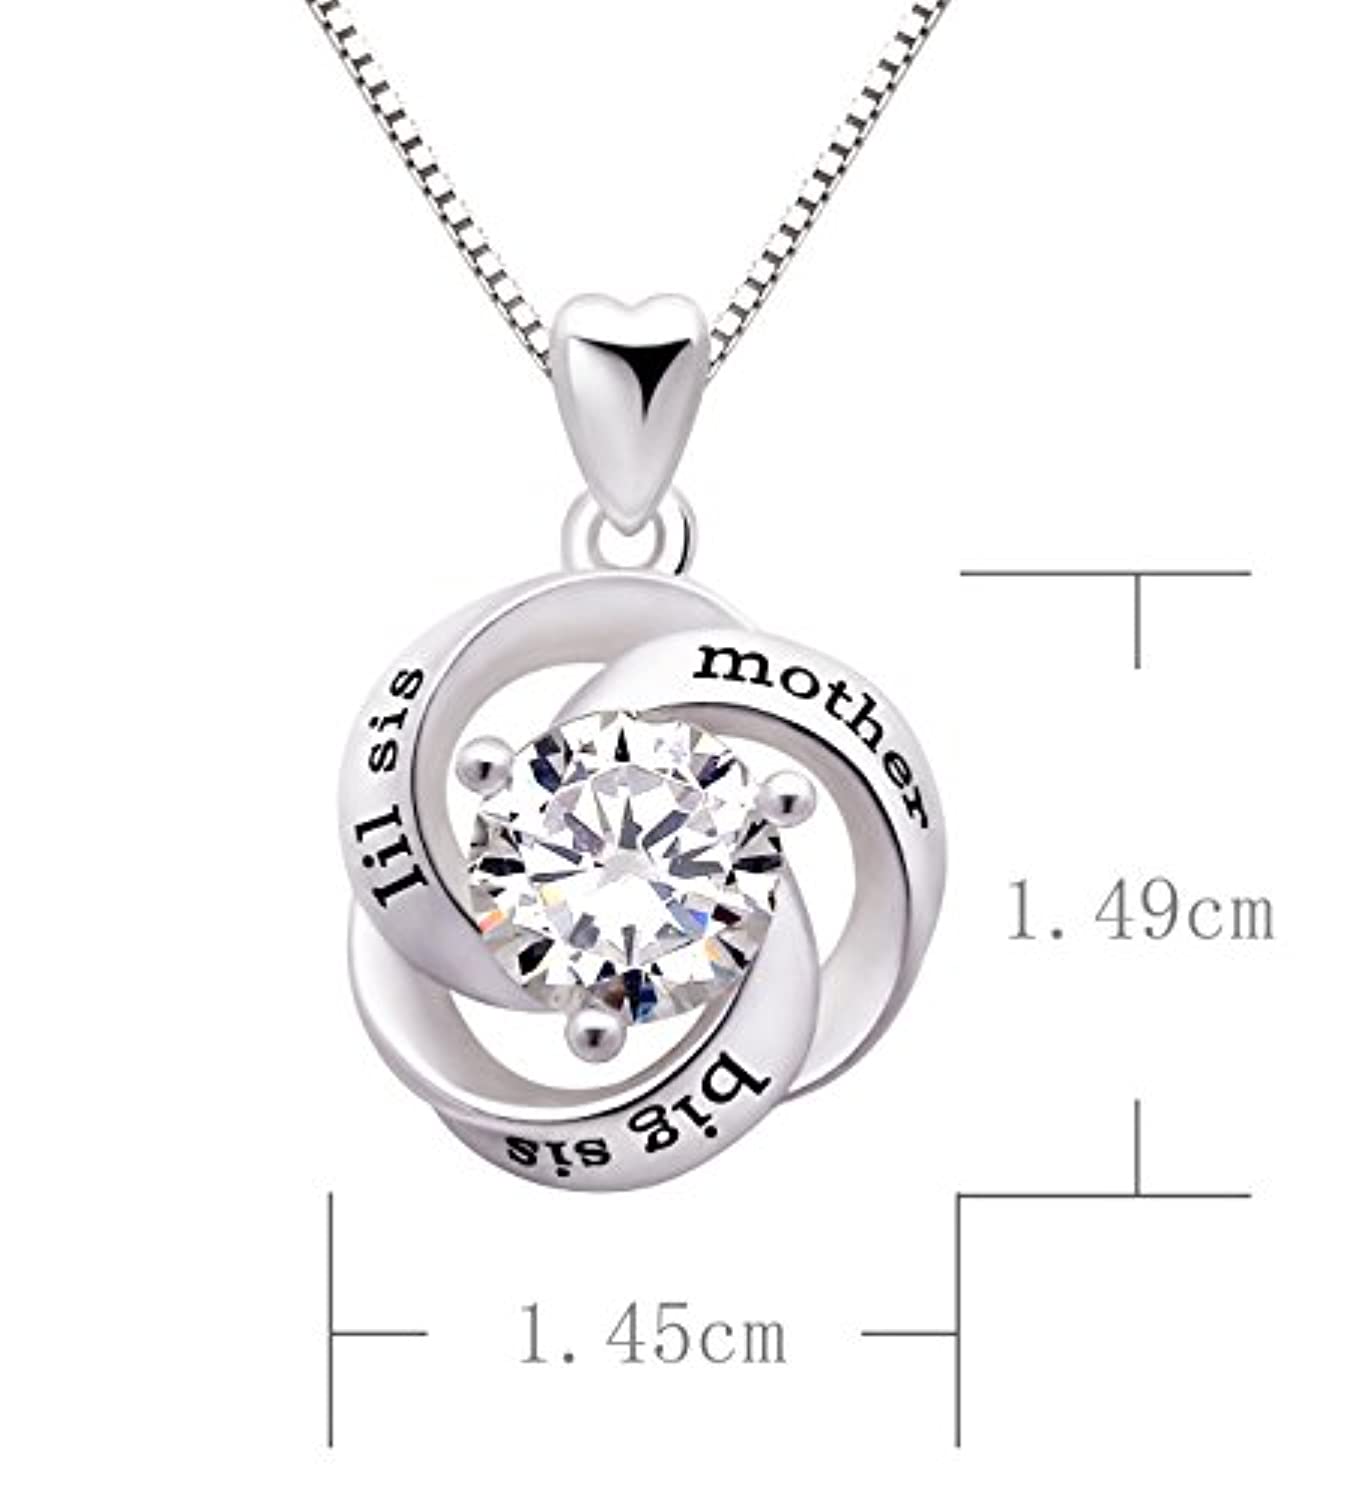 HGYCPP 3 Pcs/Set Heart Necklace Big Sis Mom Little Sis Carved Pendant For  Mother's Day Gifts Women Jewelry Charms Family Daughter - Walmart.com